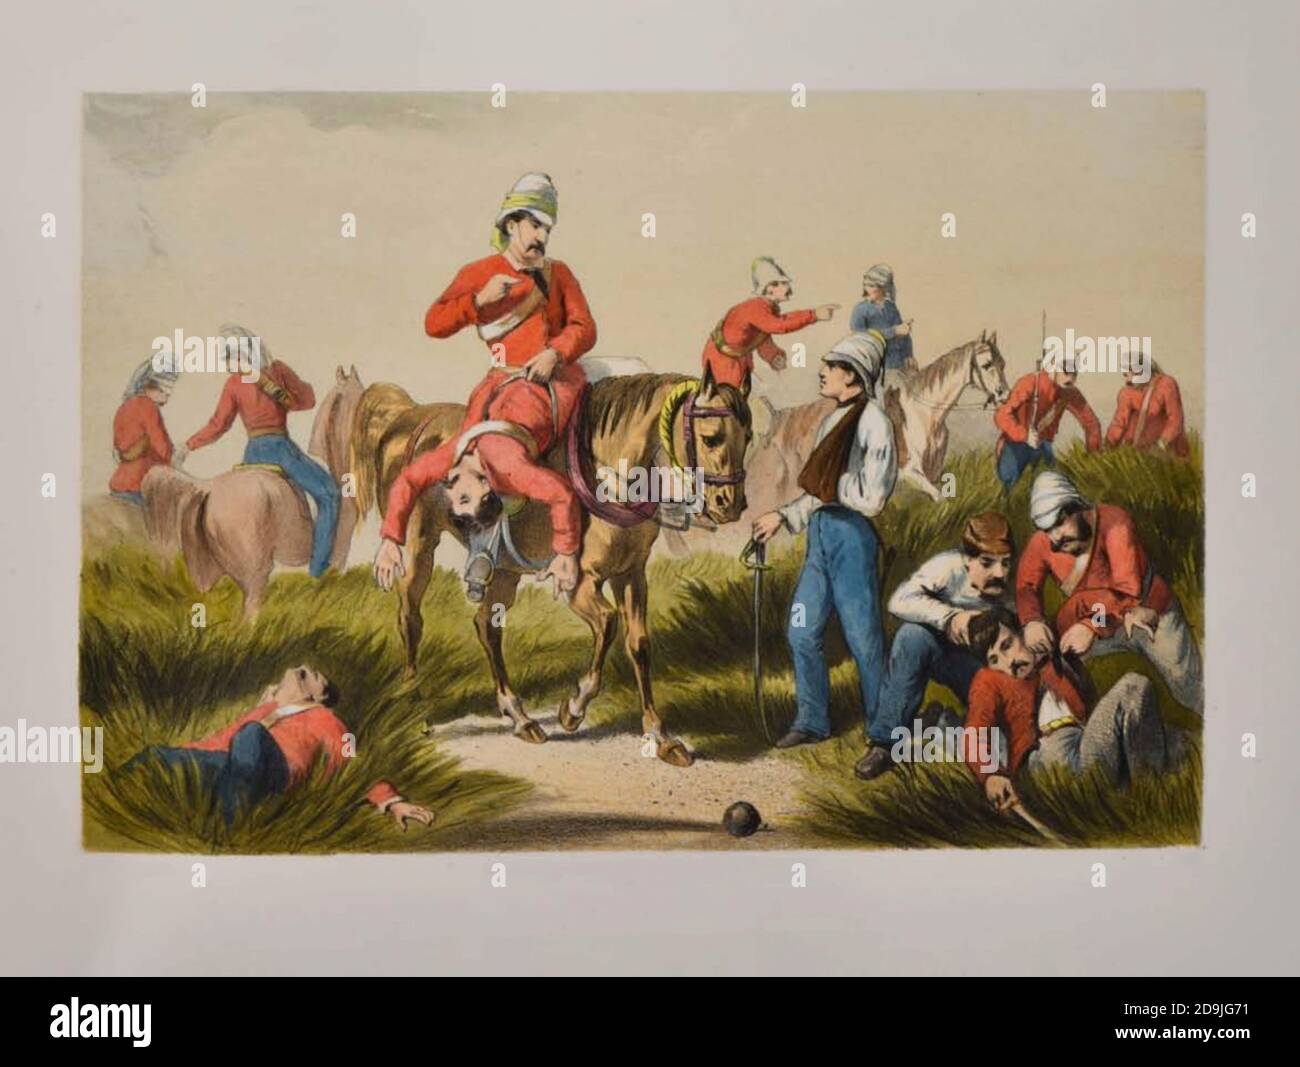 Search for the Wounded Lithograph from the book Campaign in India 1857-58 Illustrating the Military Operations before Delhi ; 26 handkolorierte lithographierte Platten. Von George Francklin Atkinson Published by Day & Son Lithographers to the Queen in 1859 Stockfoto